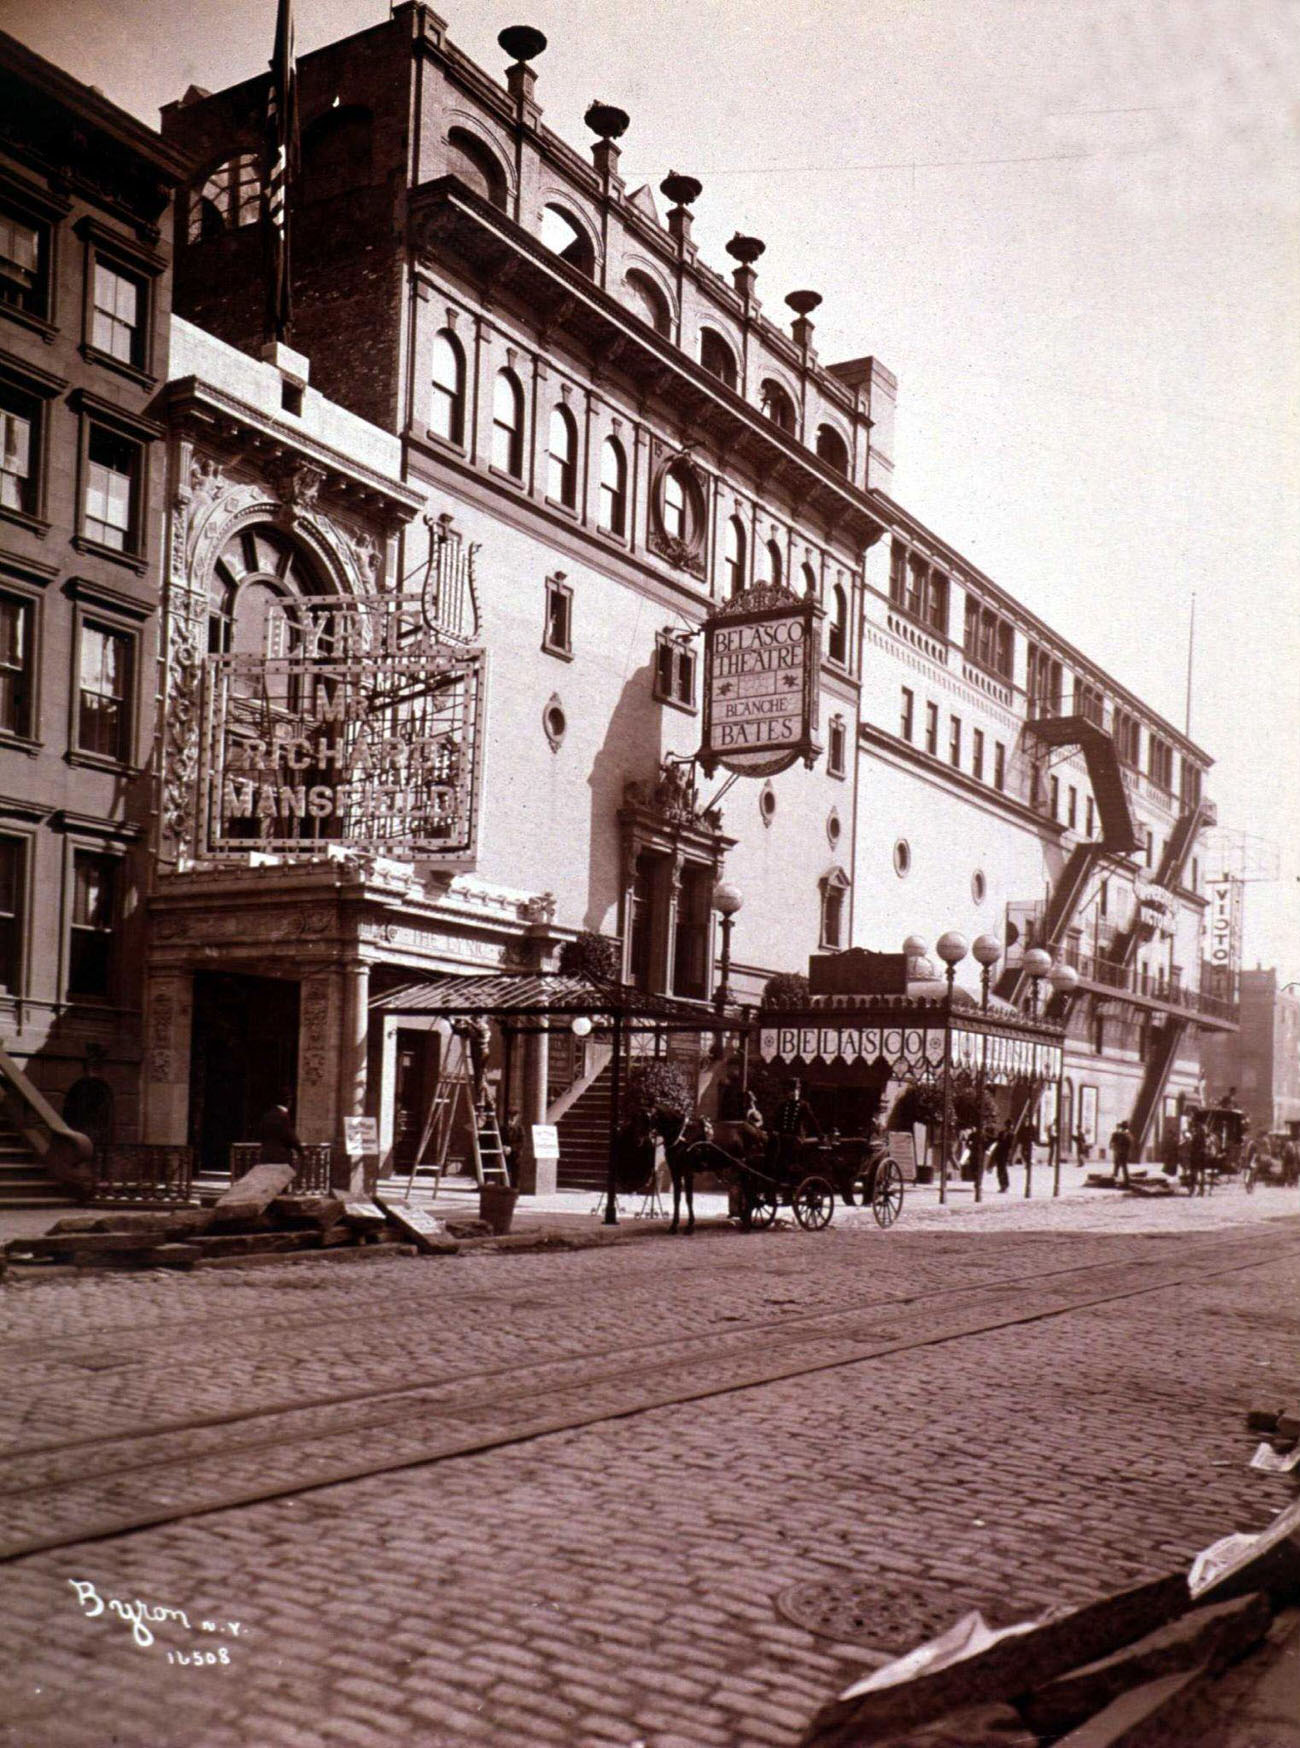 The Exterior Of The Belasco Theater At West 42Nd Street Near Broadway In Times Square, New York City Is Seen As It Appeared In 1904.